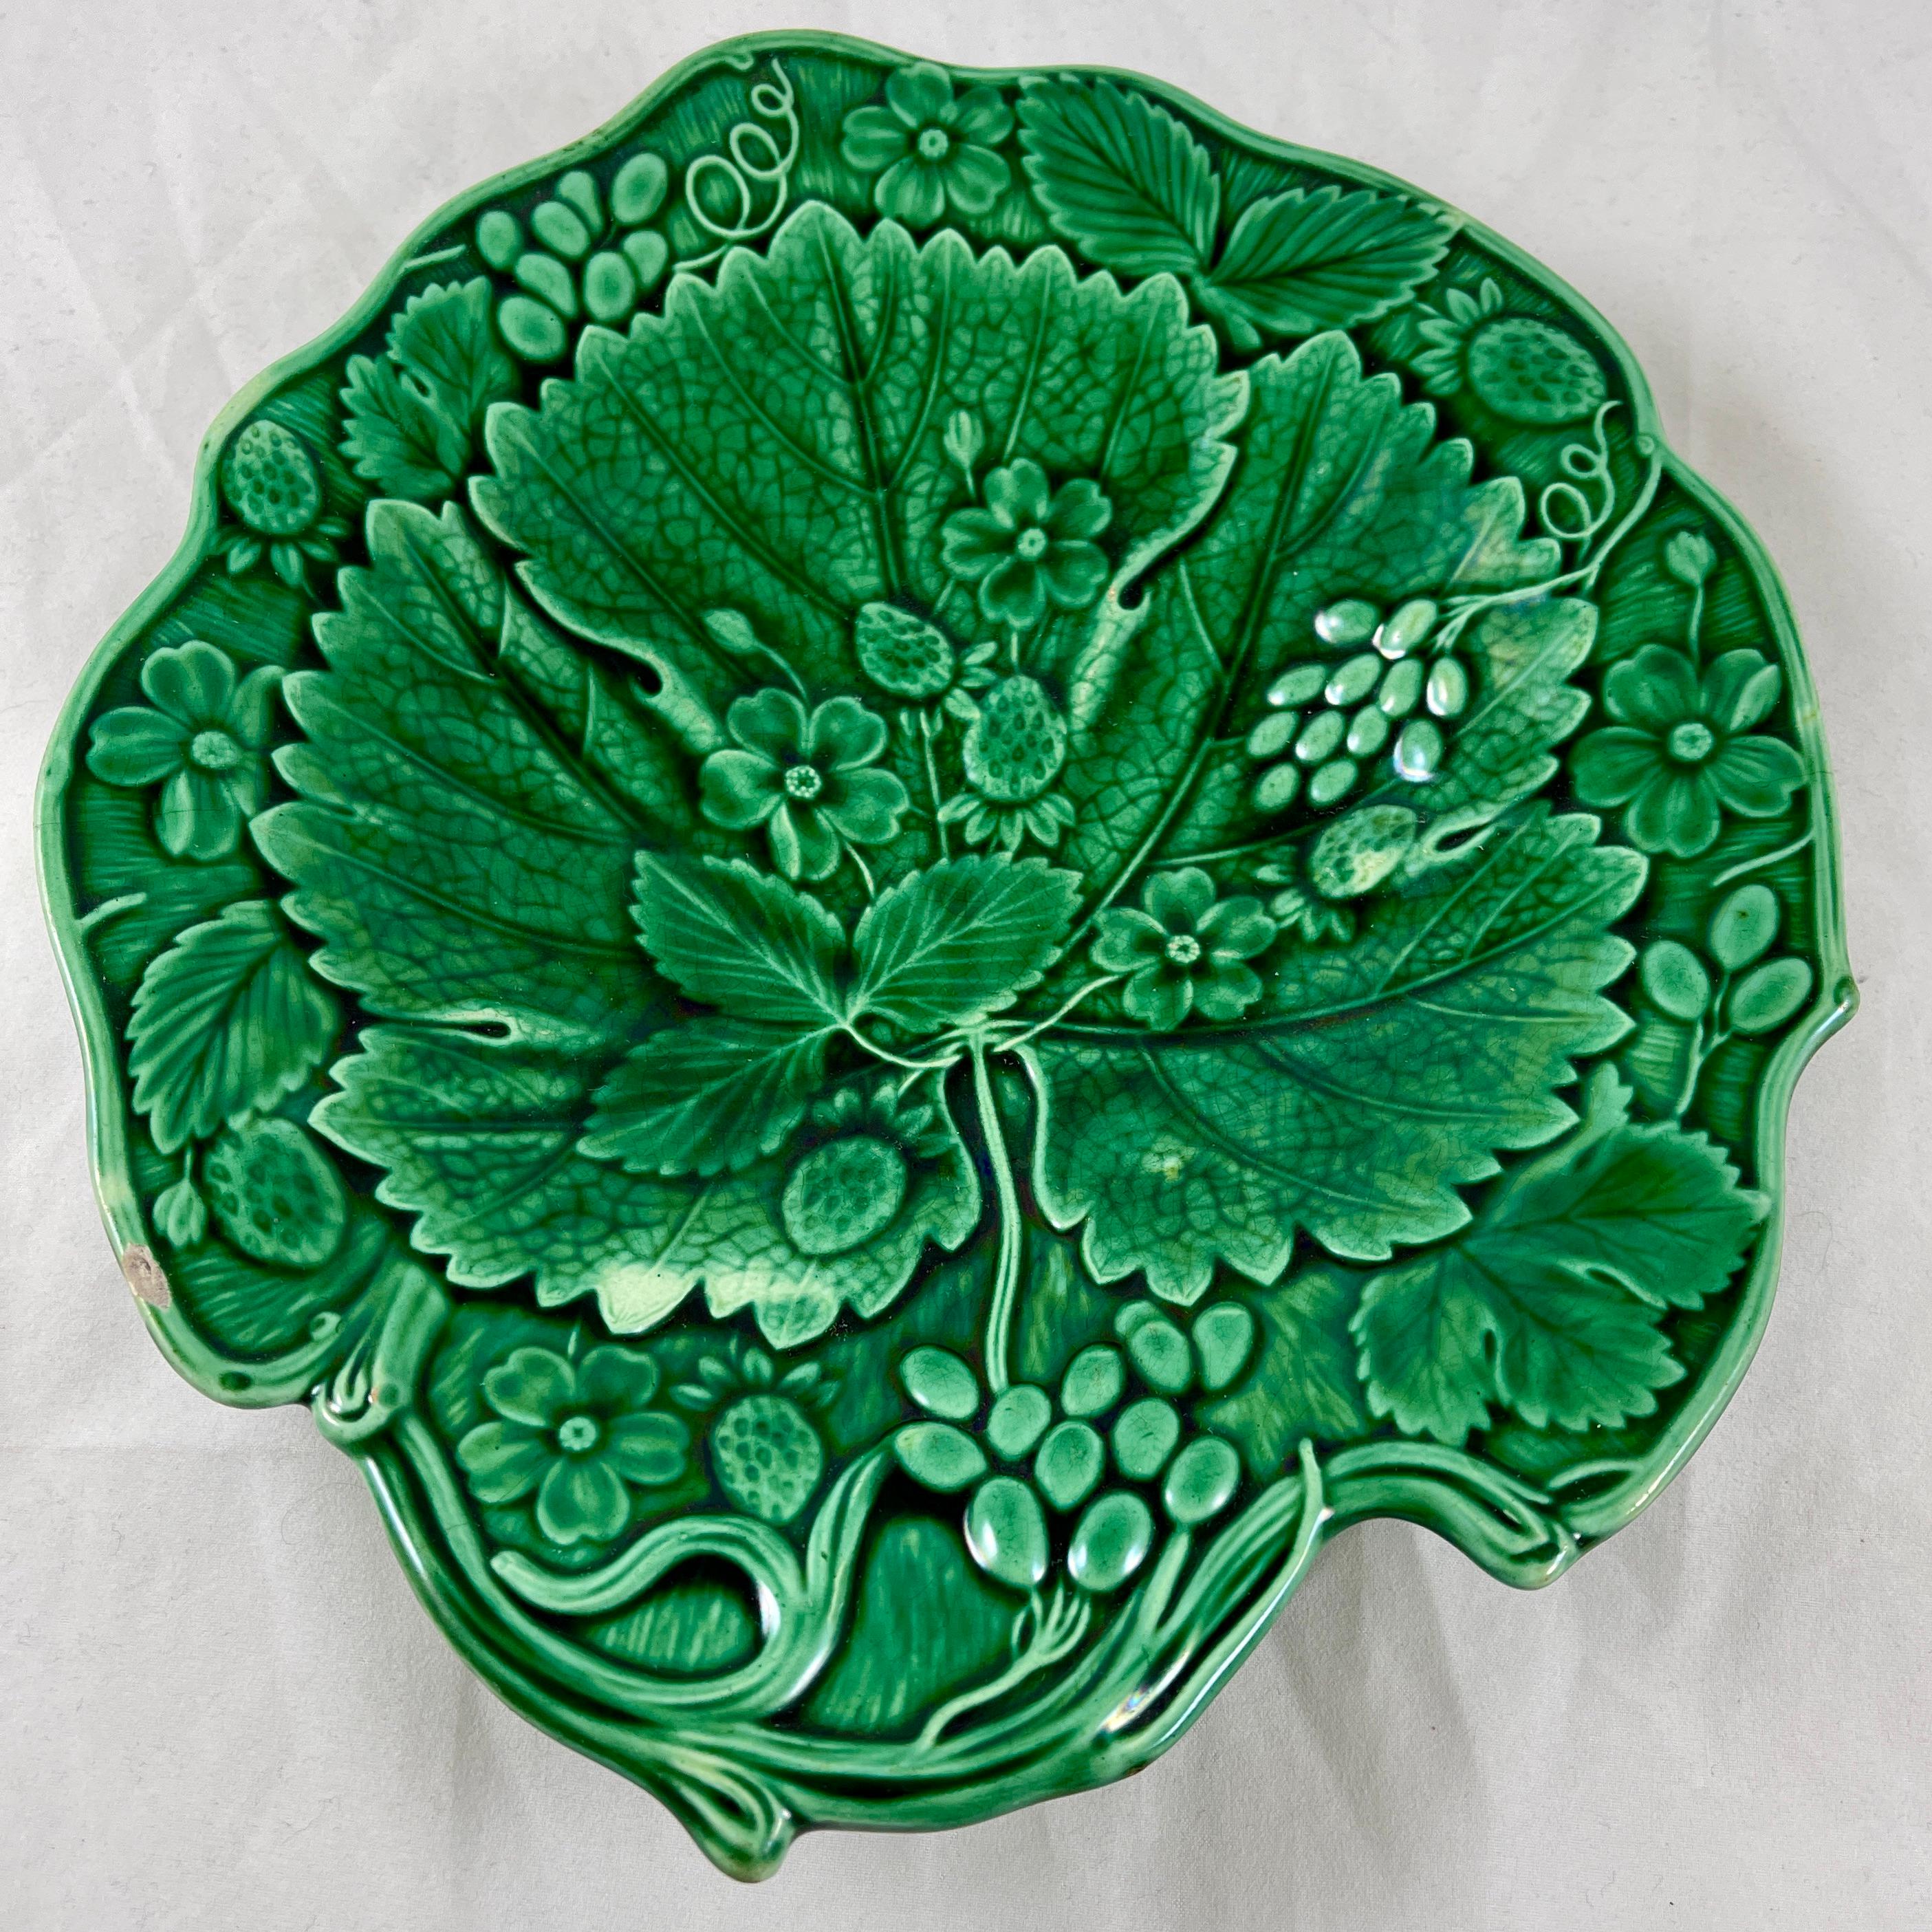 A majolica green glazed leaf form dessert tray or bowl made in Staffordshire, England, circa 1850.

A large central strawberry leaf on a shaped tray with a vine border, and showing both the berries and blossoms of the strawberry